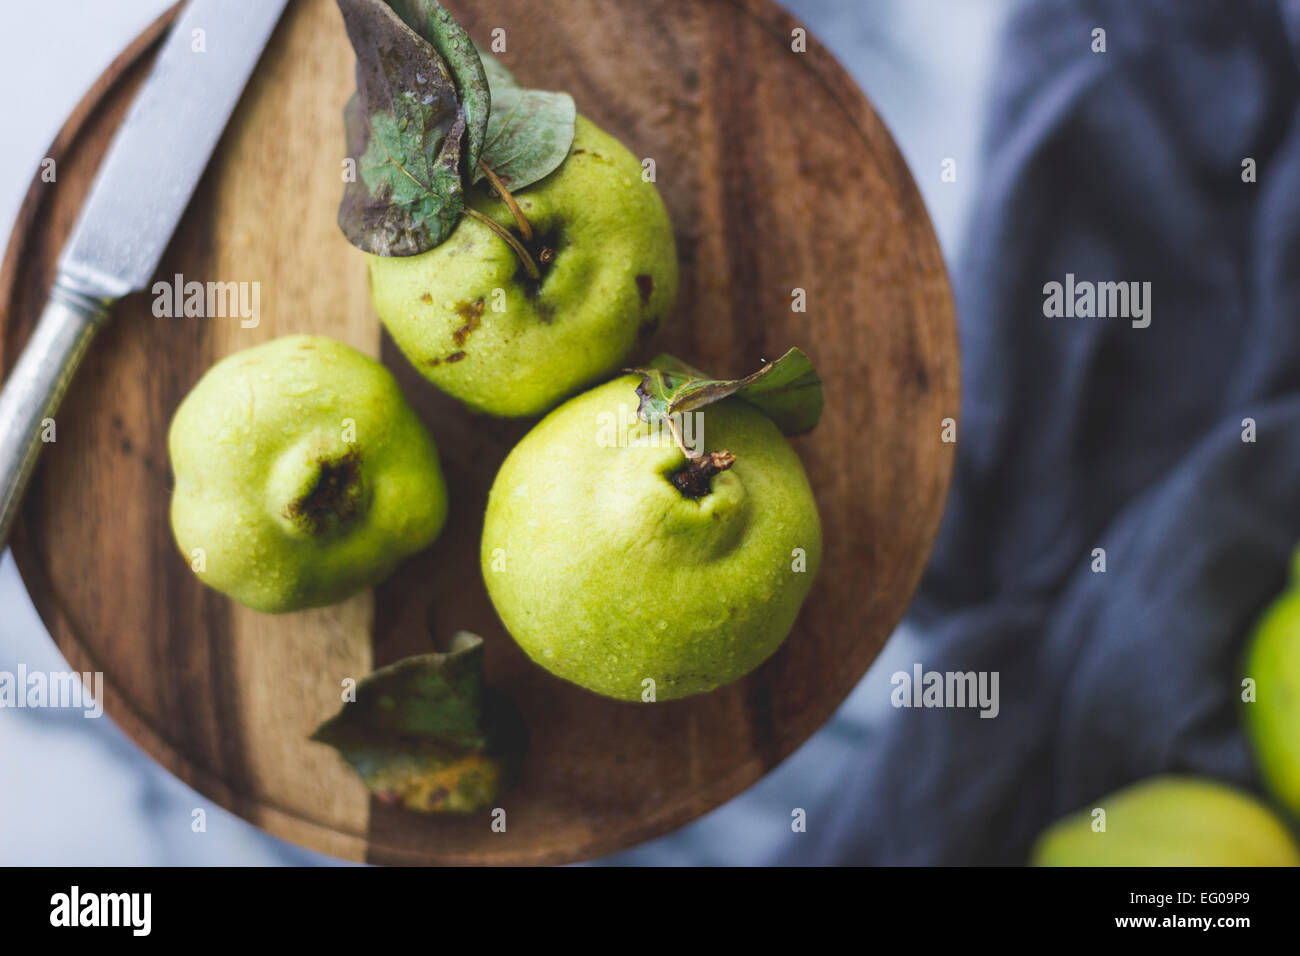 Quince fruit on a chopping board Stock Photo